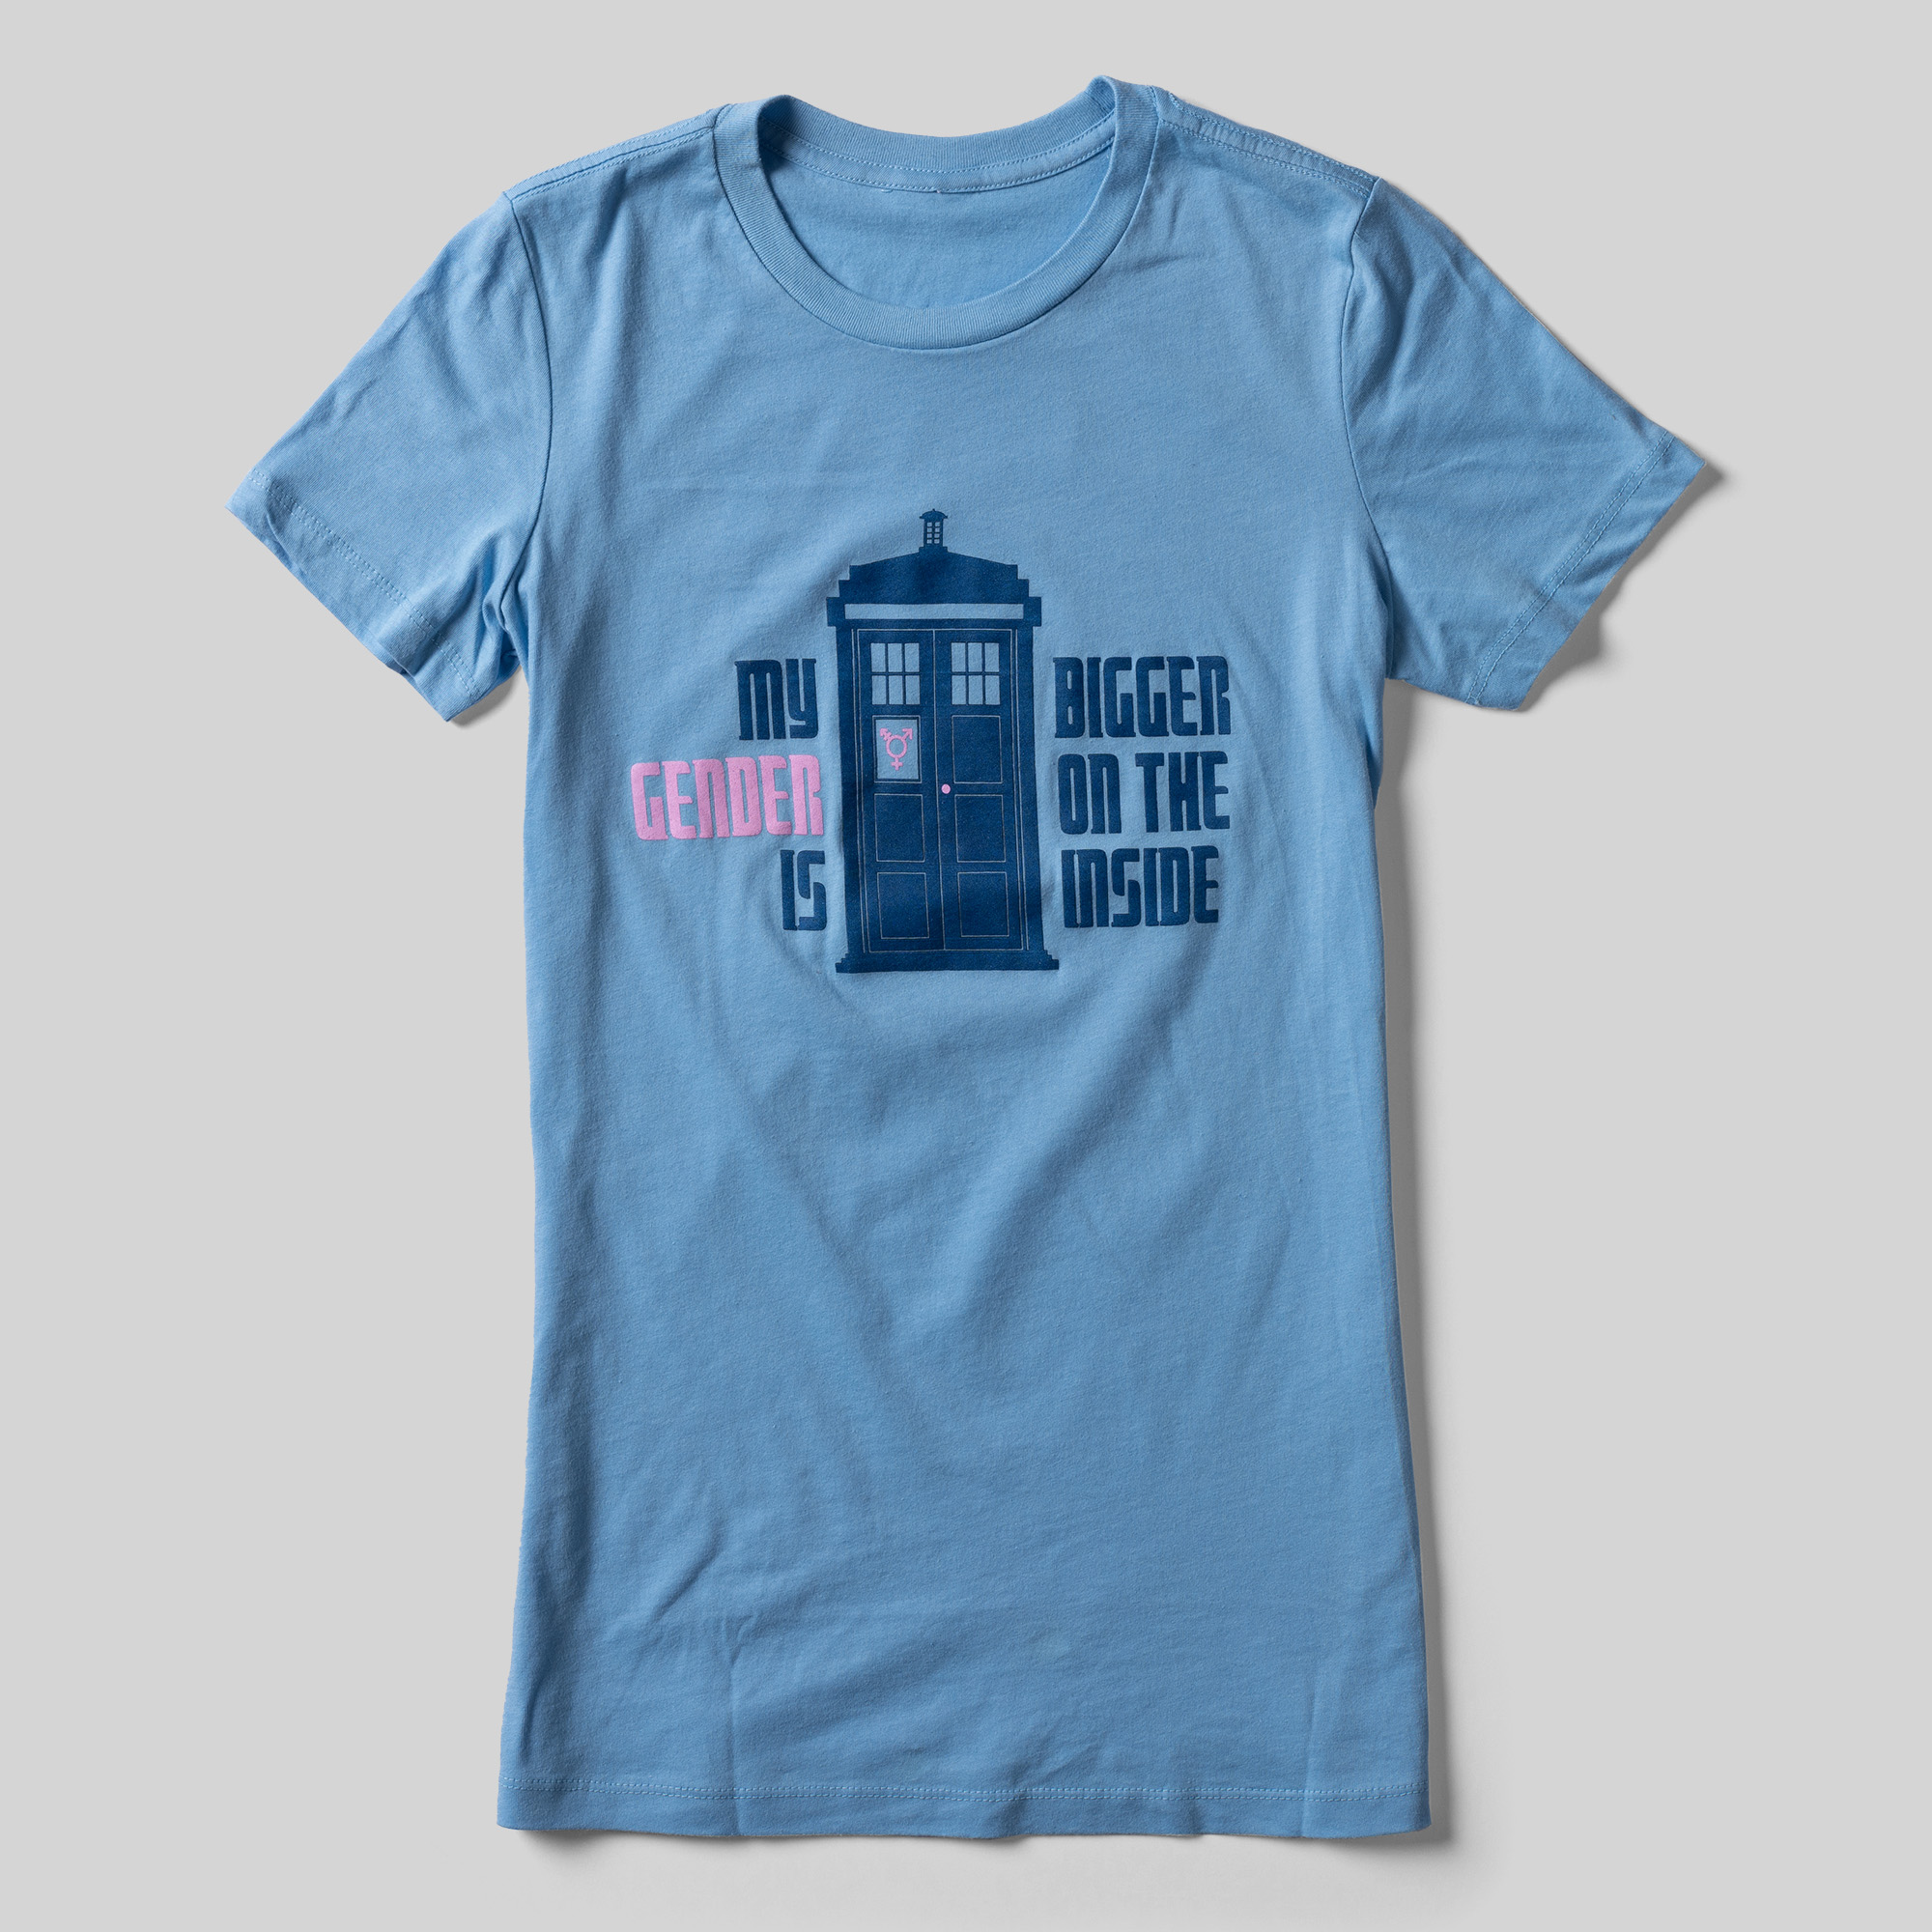 A blue t-shirt with an illustration of the Tardis from Doctor Who that reads "My Gender is Bigger on the Inside."